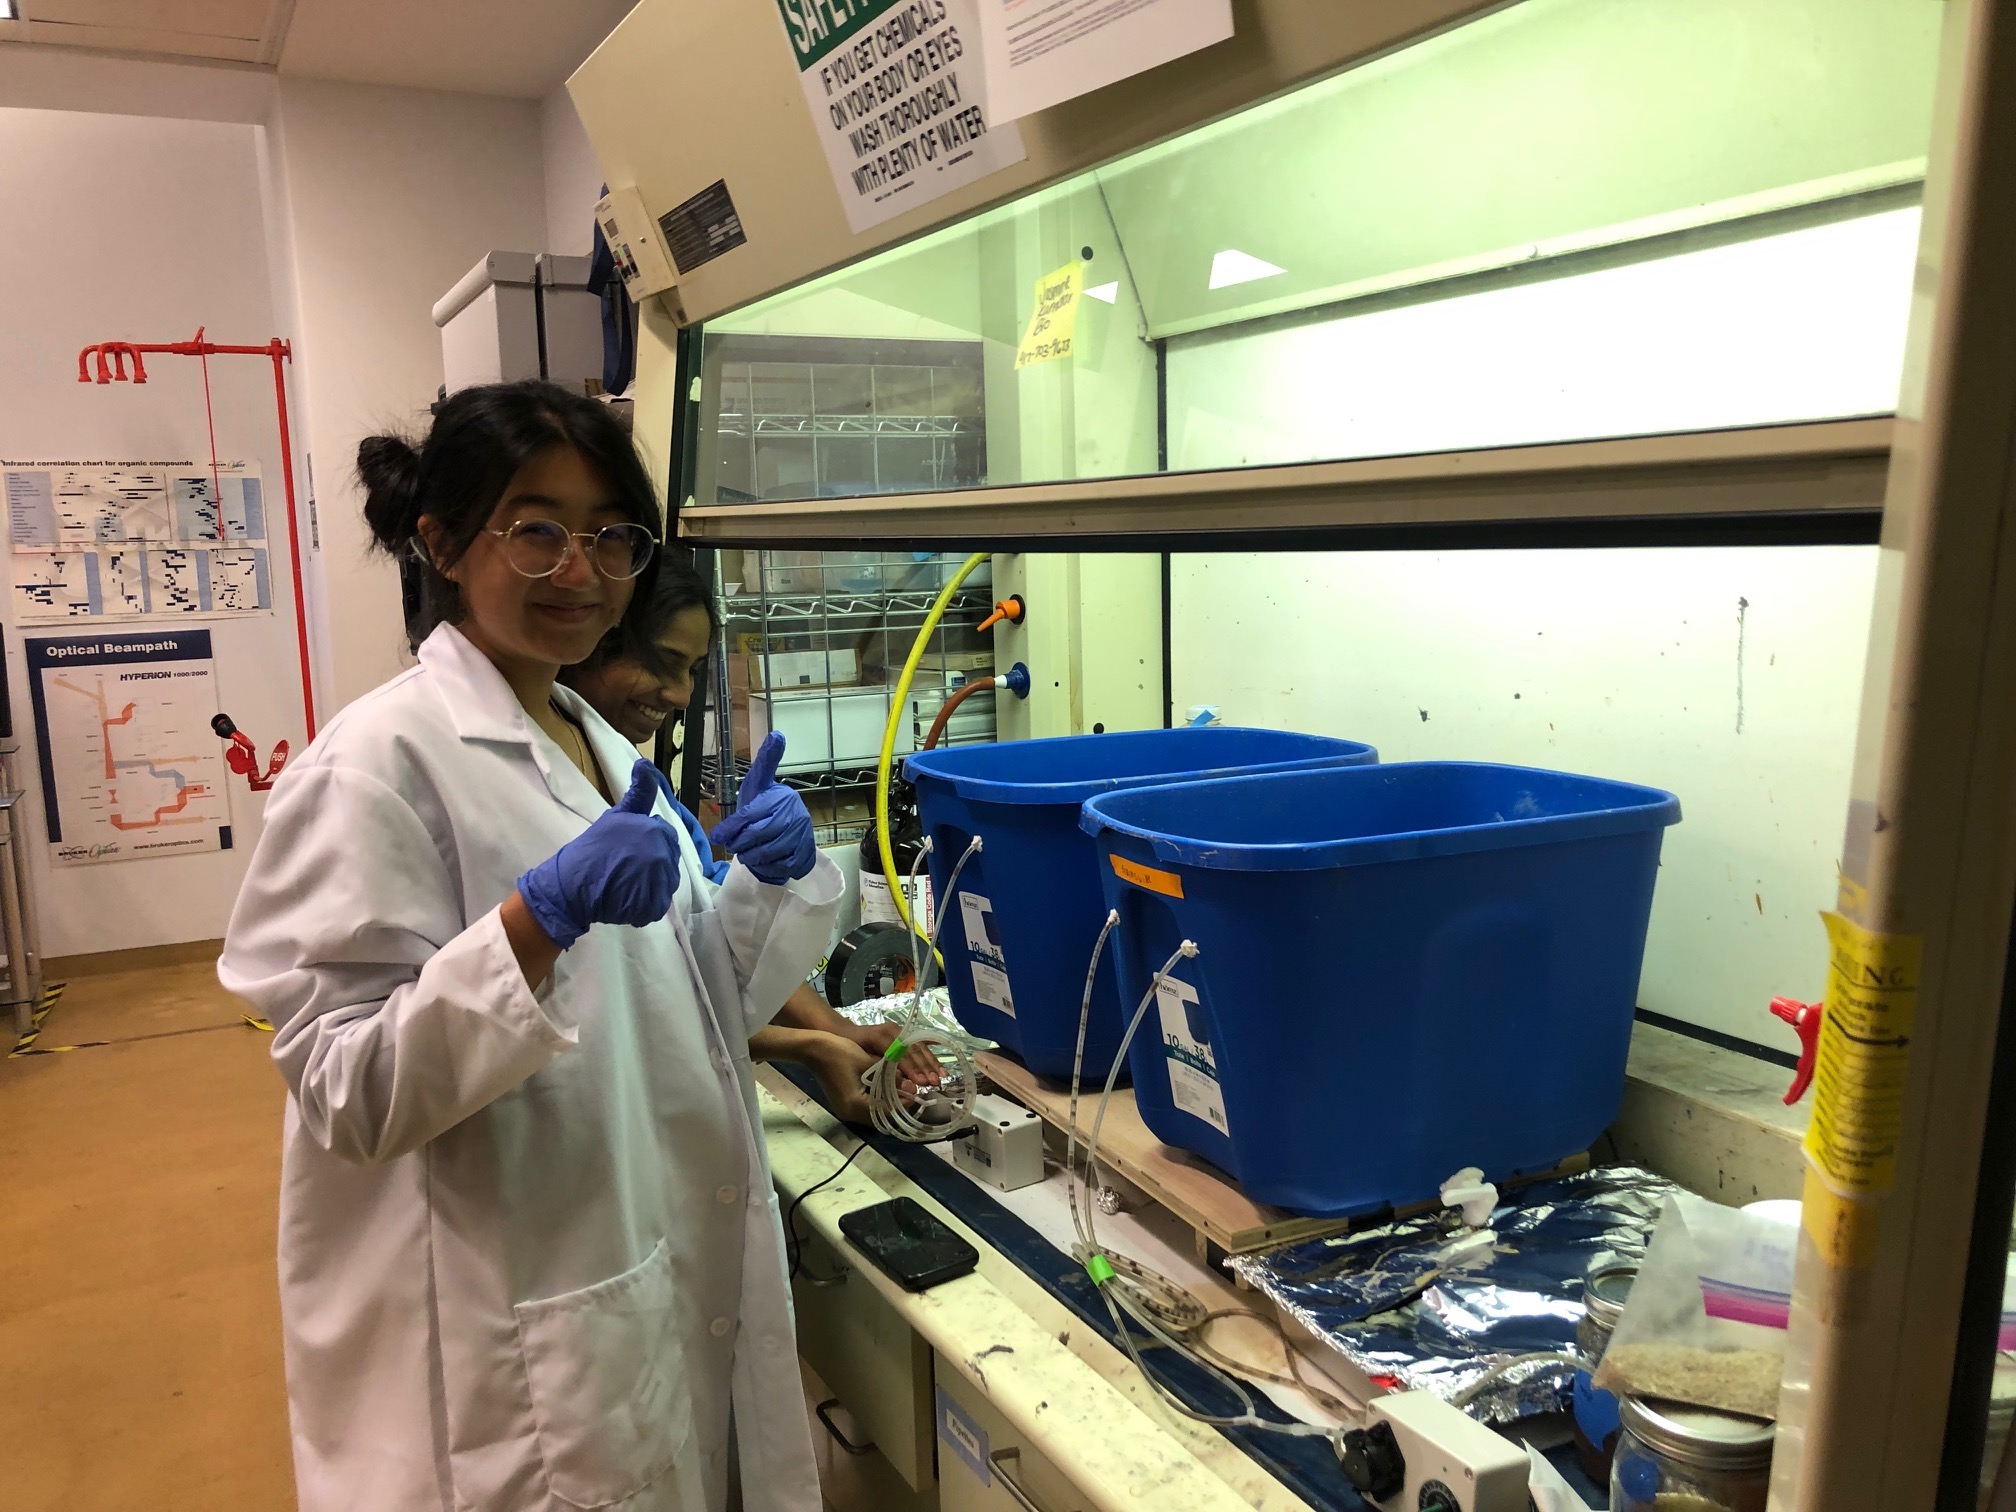 Jackie Zeng '23, a member of the Biology foundation class “Think Like a Biologist," gives a thumbs up while working in the lab.